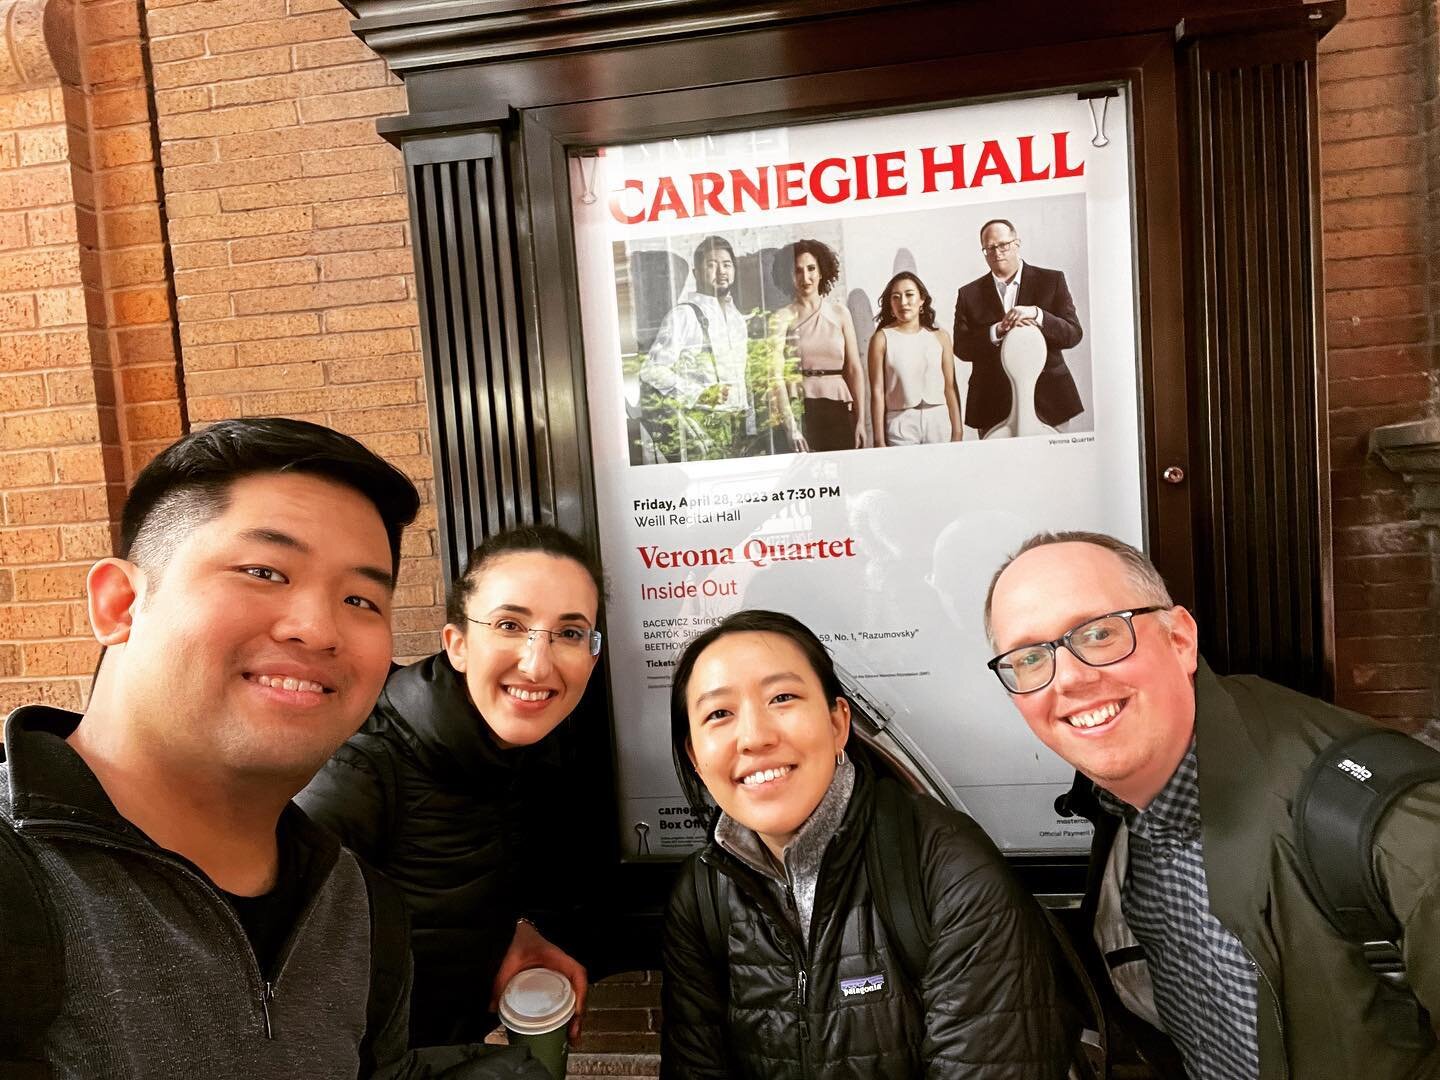 En route back home from an amazing time performing at @carnegiehall last Friday! This was the final concert on our Cleveland Quartet Award tour and we were so fortunate to celebrate with so many friends and families who traveled from afar and close b